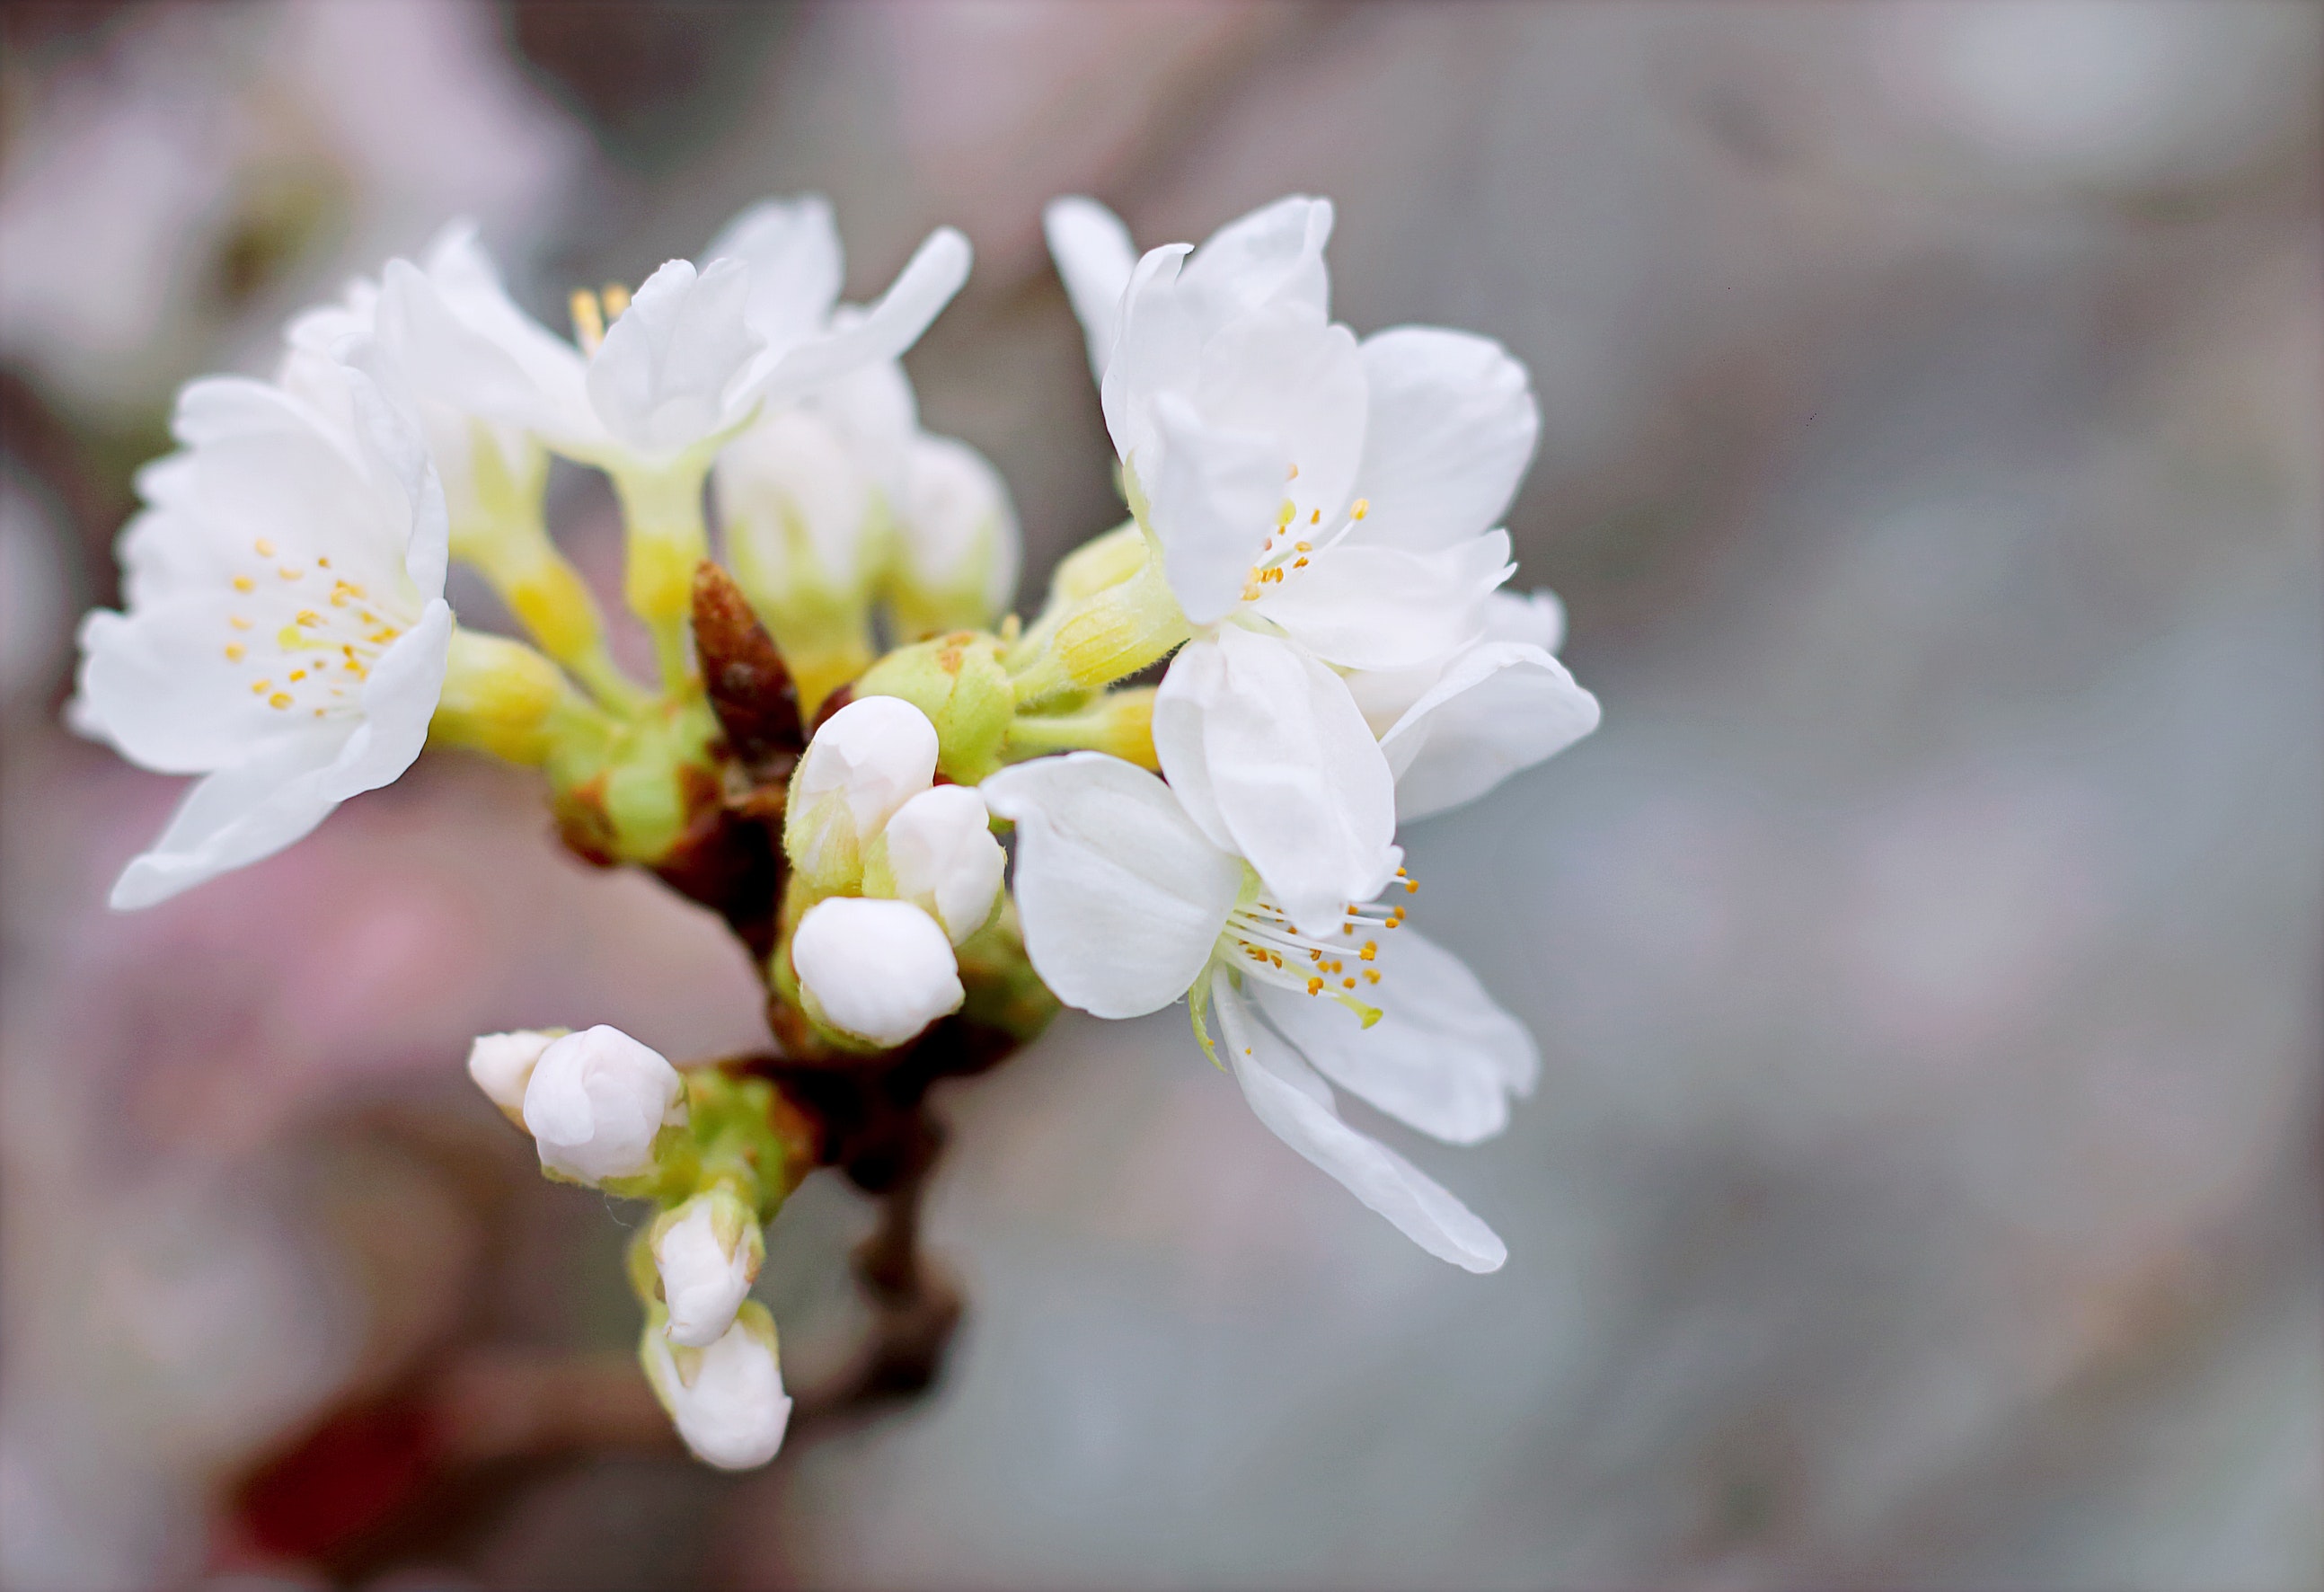 White cherry blossoms in bloom close-up photo